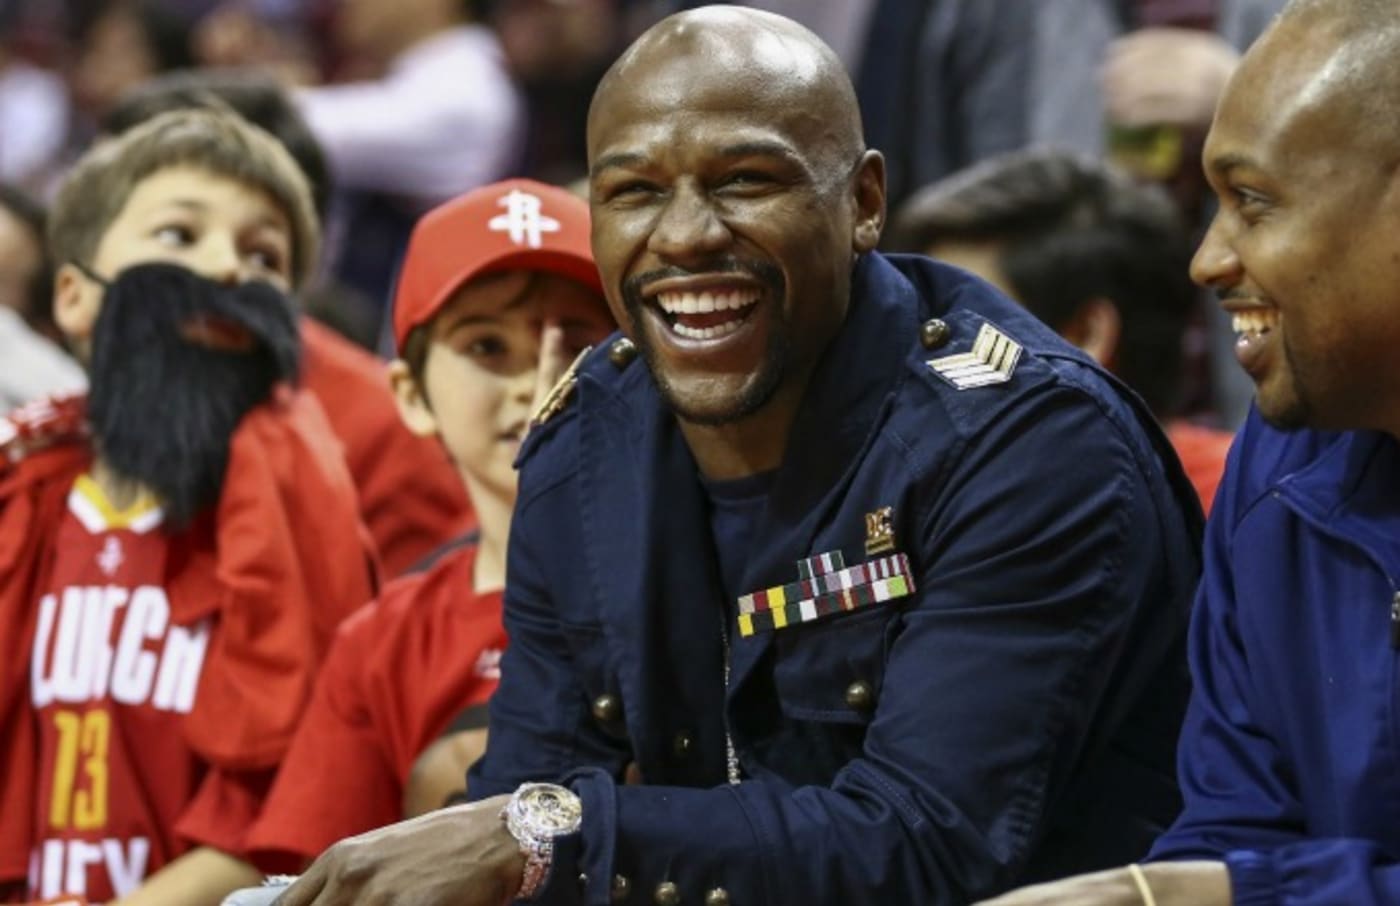 Floyd Mayweather laughs during an NBA game.